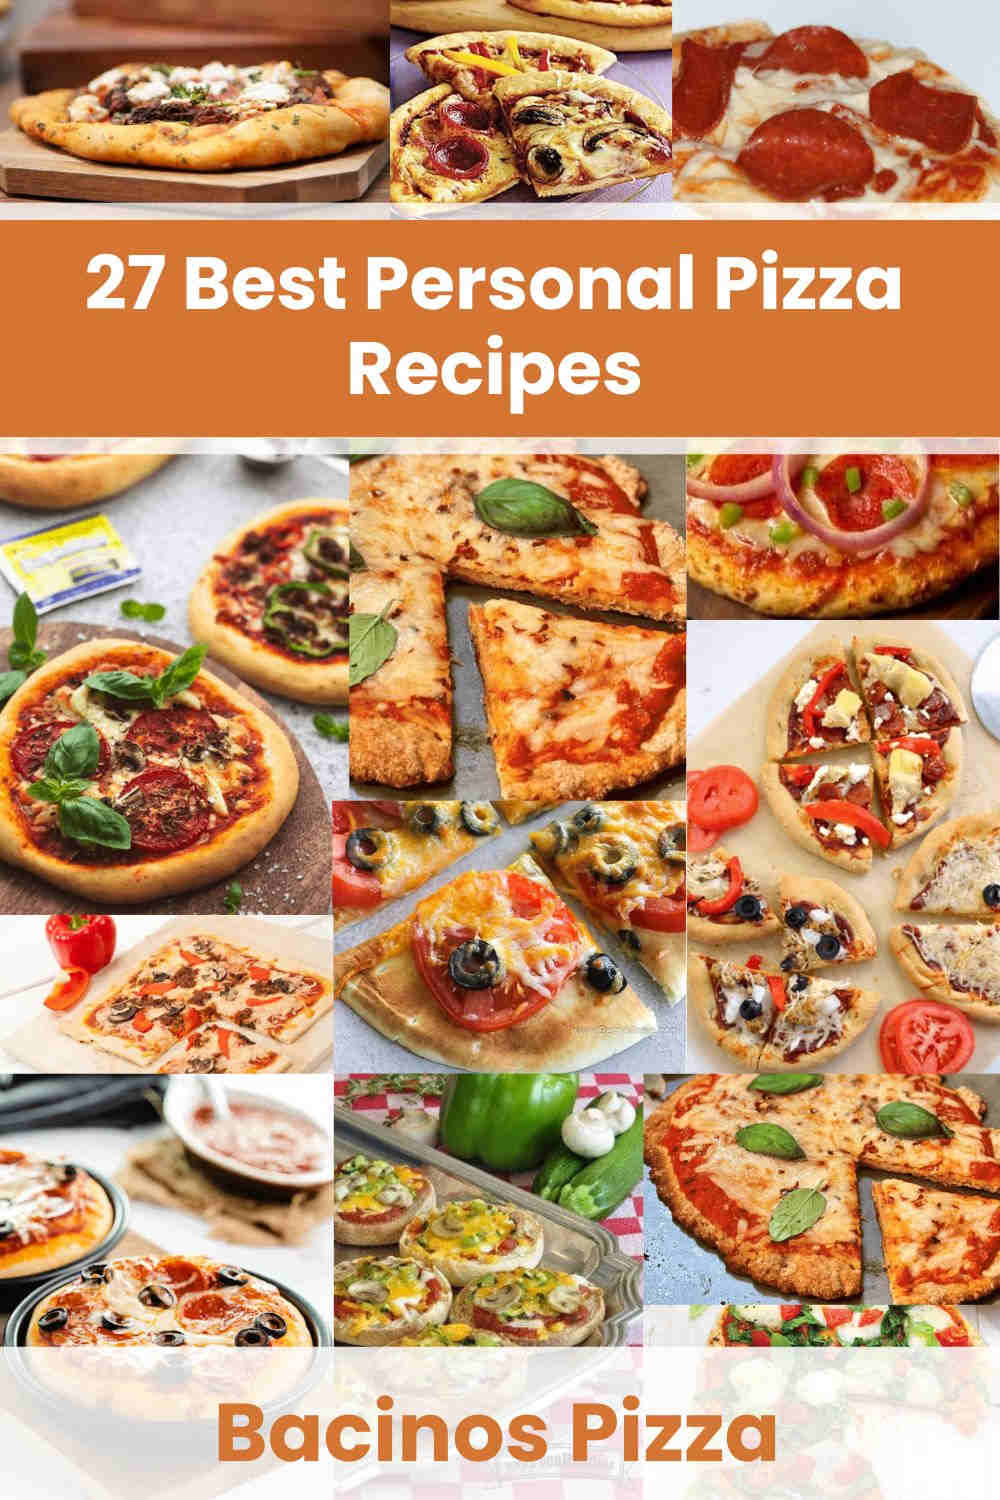 Best Personal Pizza Recipes